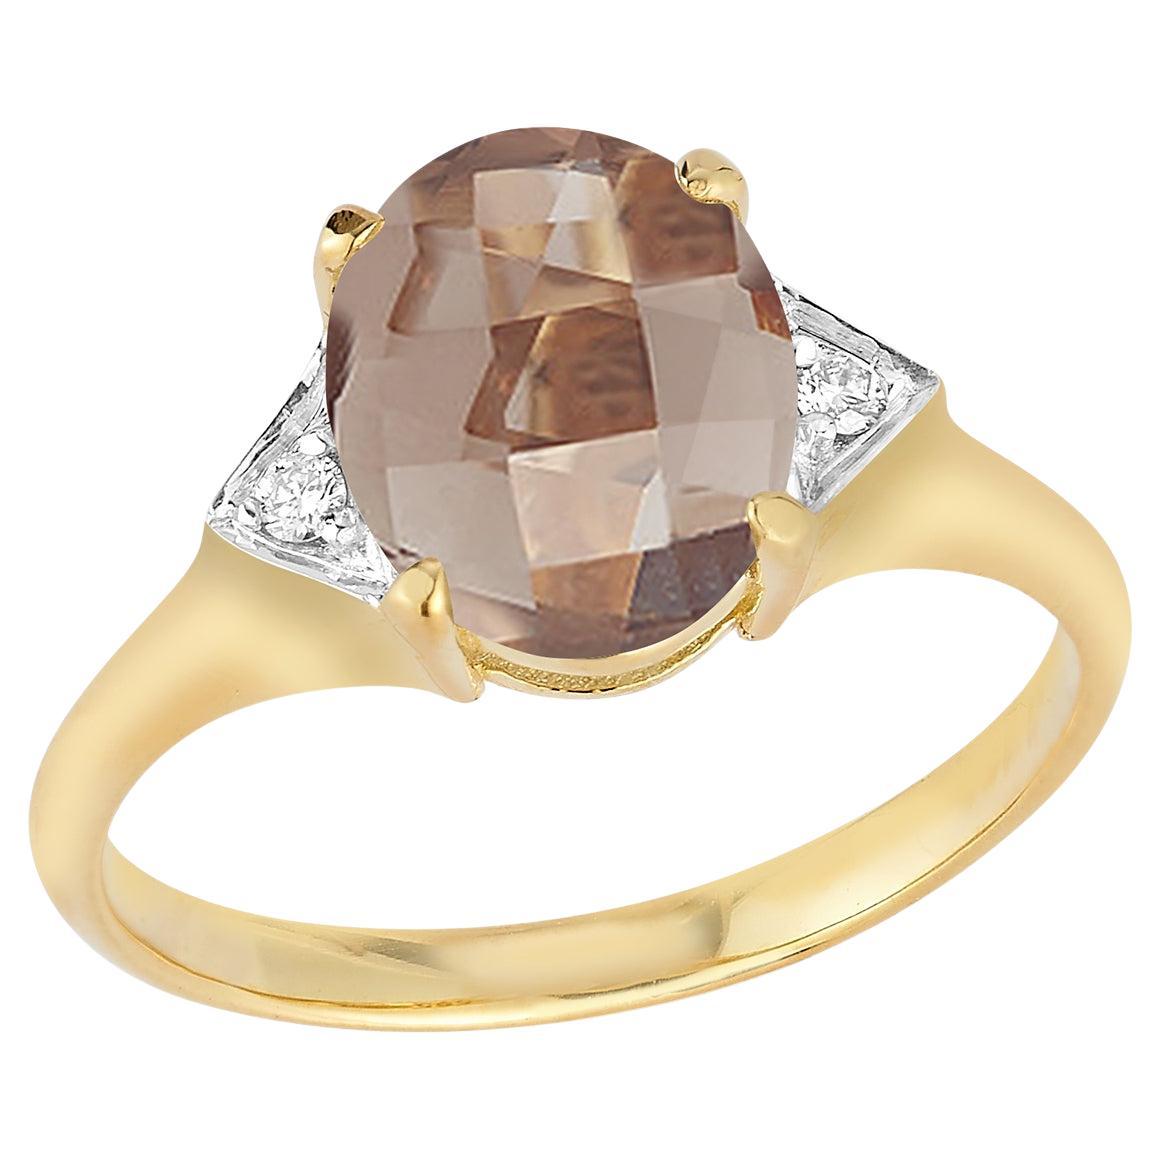 Hand-Crafted 14K Gold 0.05 ct. tw. Diamond & 4.75CT Smokey Topaz Cocktail Ring